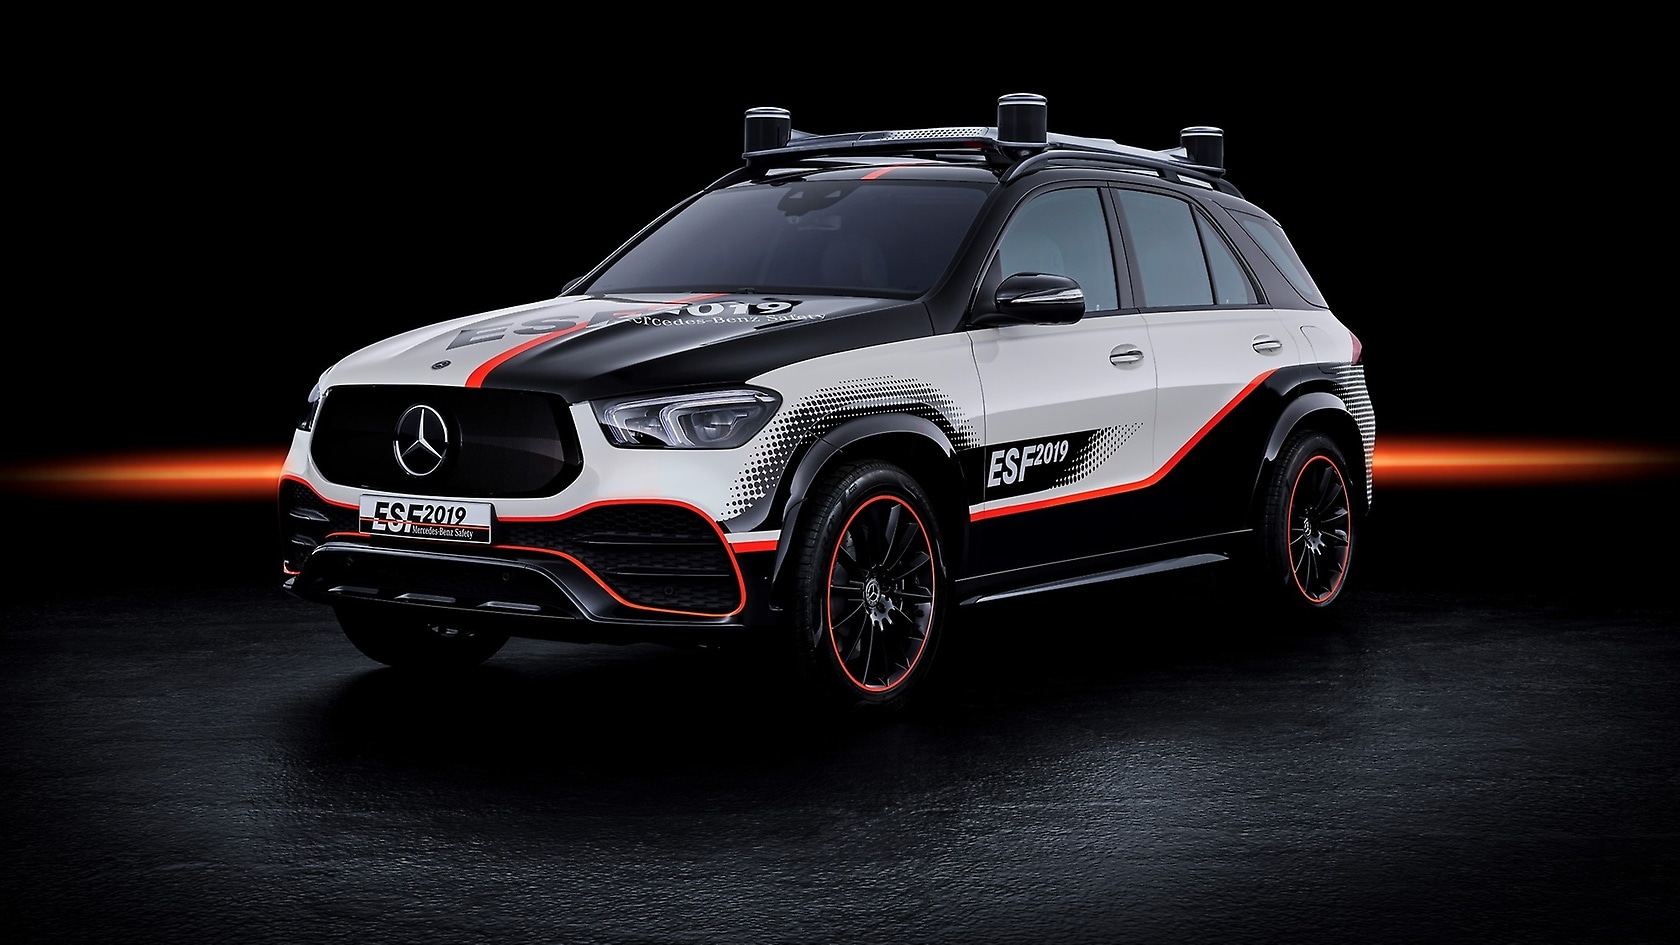 Mercedes-Benz Experimental Safety Vehicle (ESF) 2019.